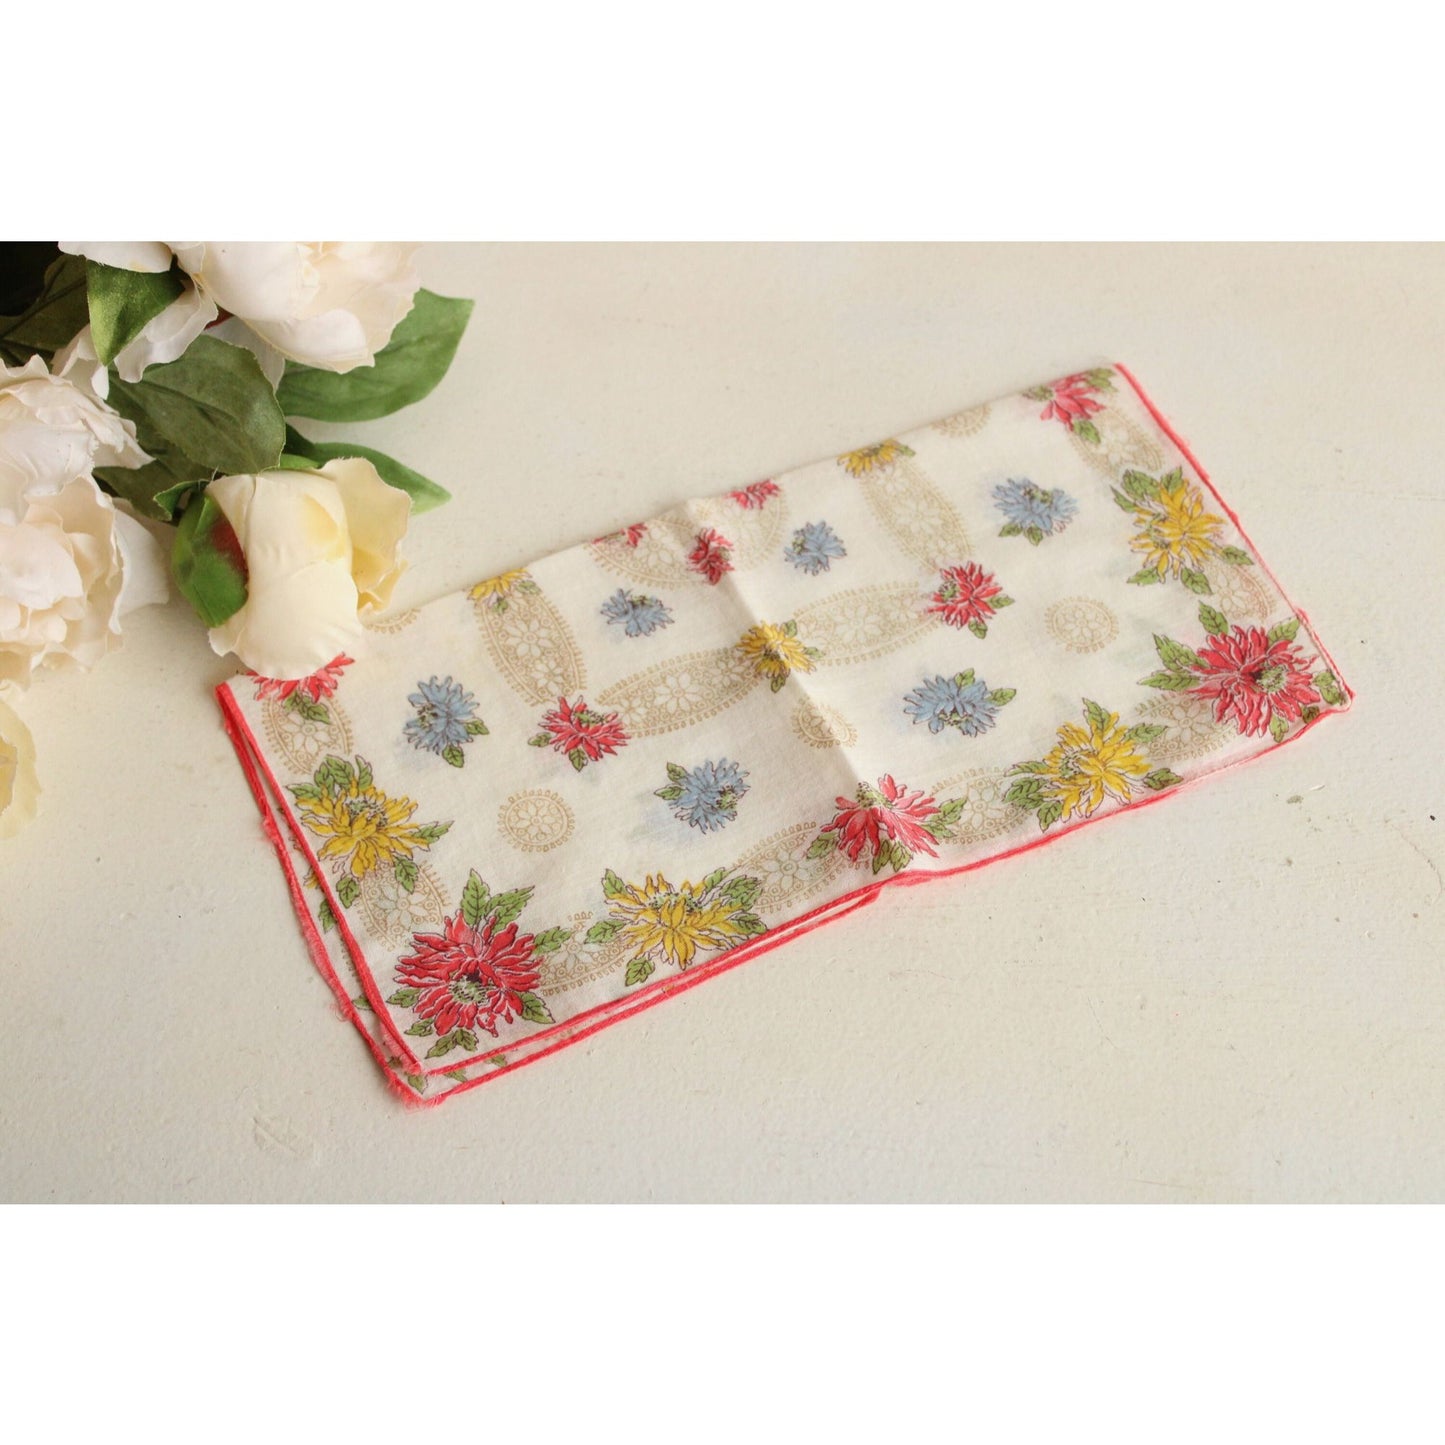 Vintage 1940s 1950s Red, Bue and Yellow Flower Print Cotton Hanky